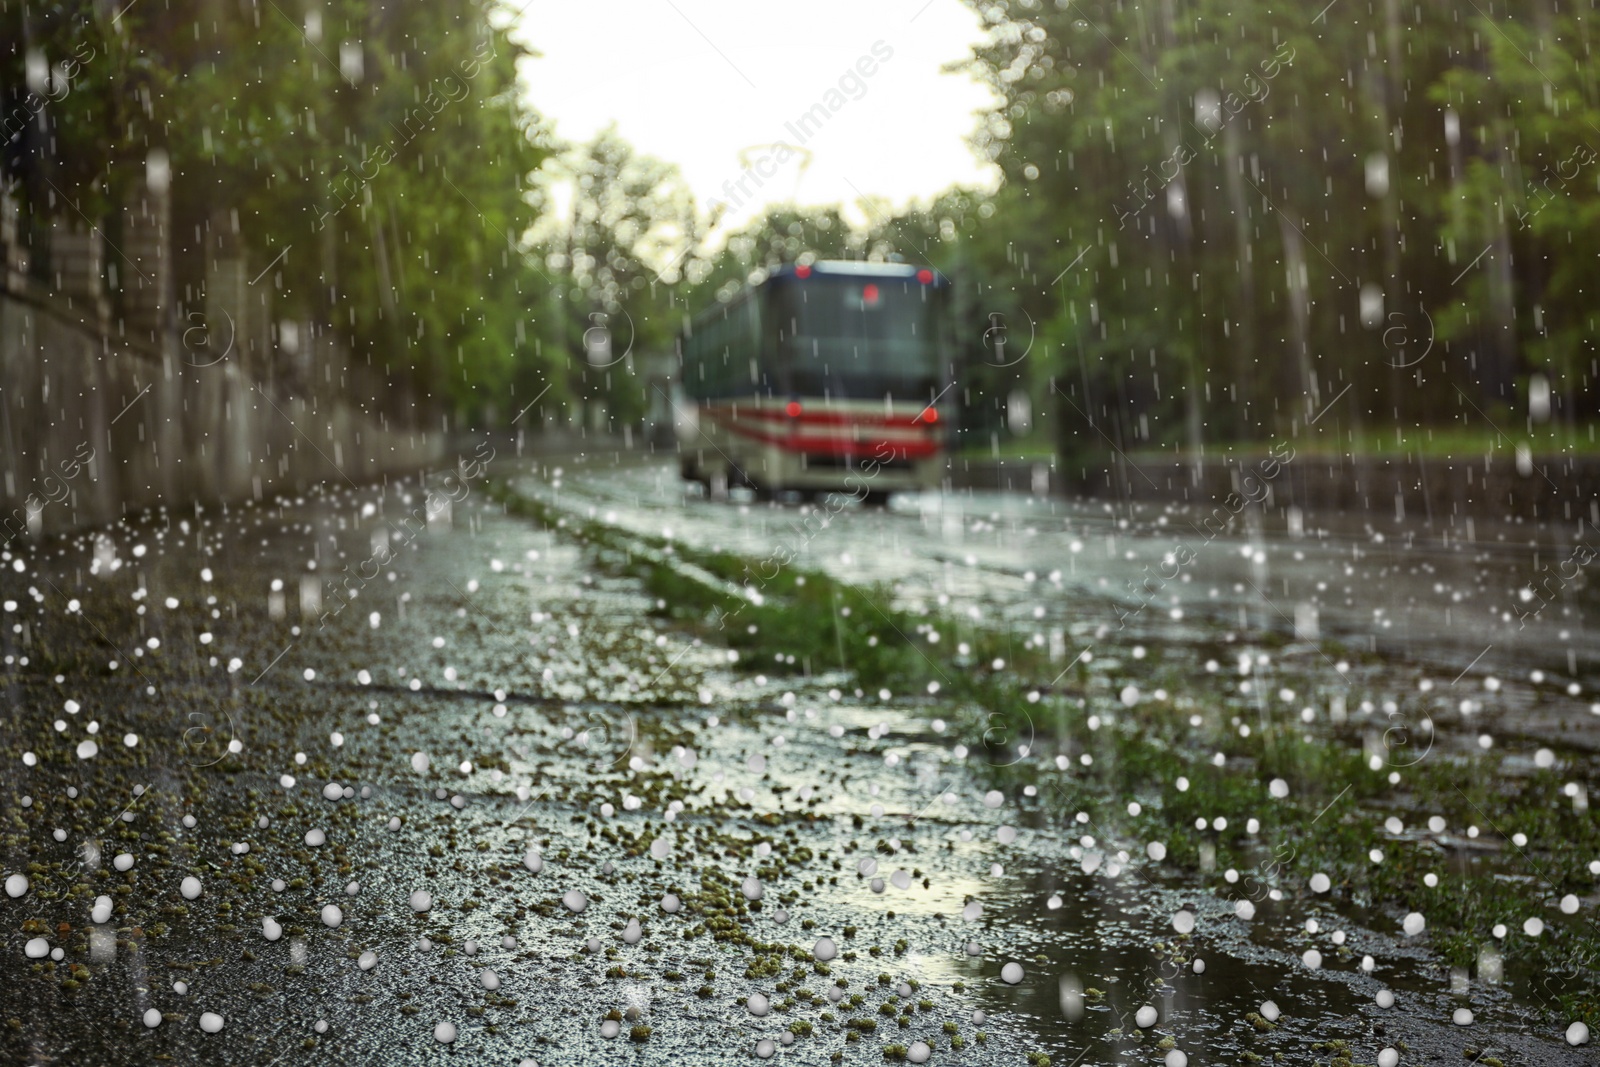 Image of View of tram on city street on rainy day with hail